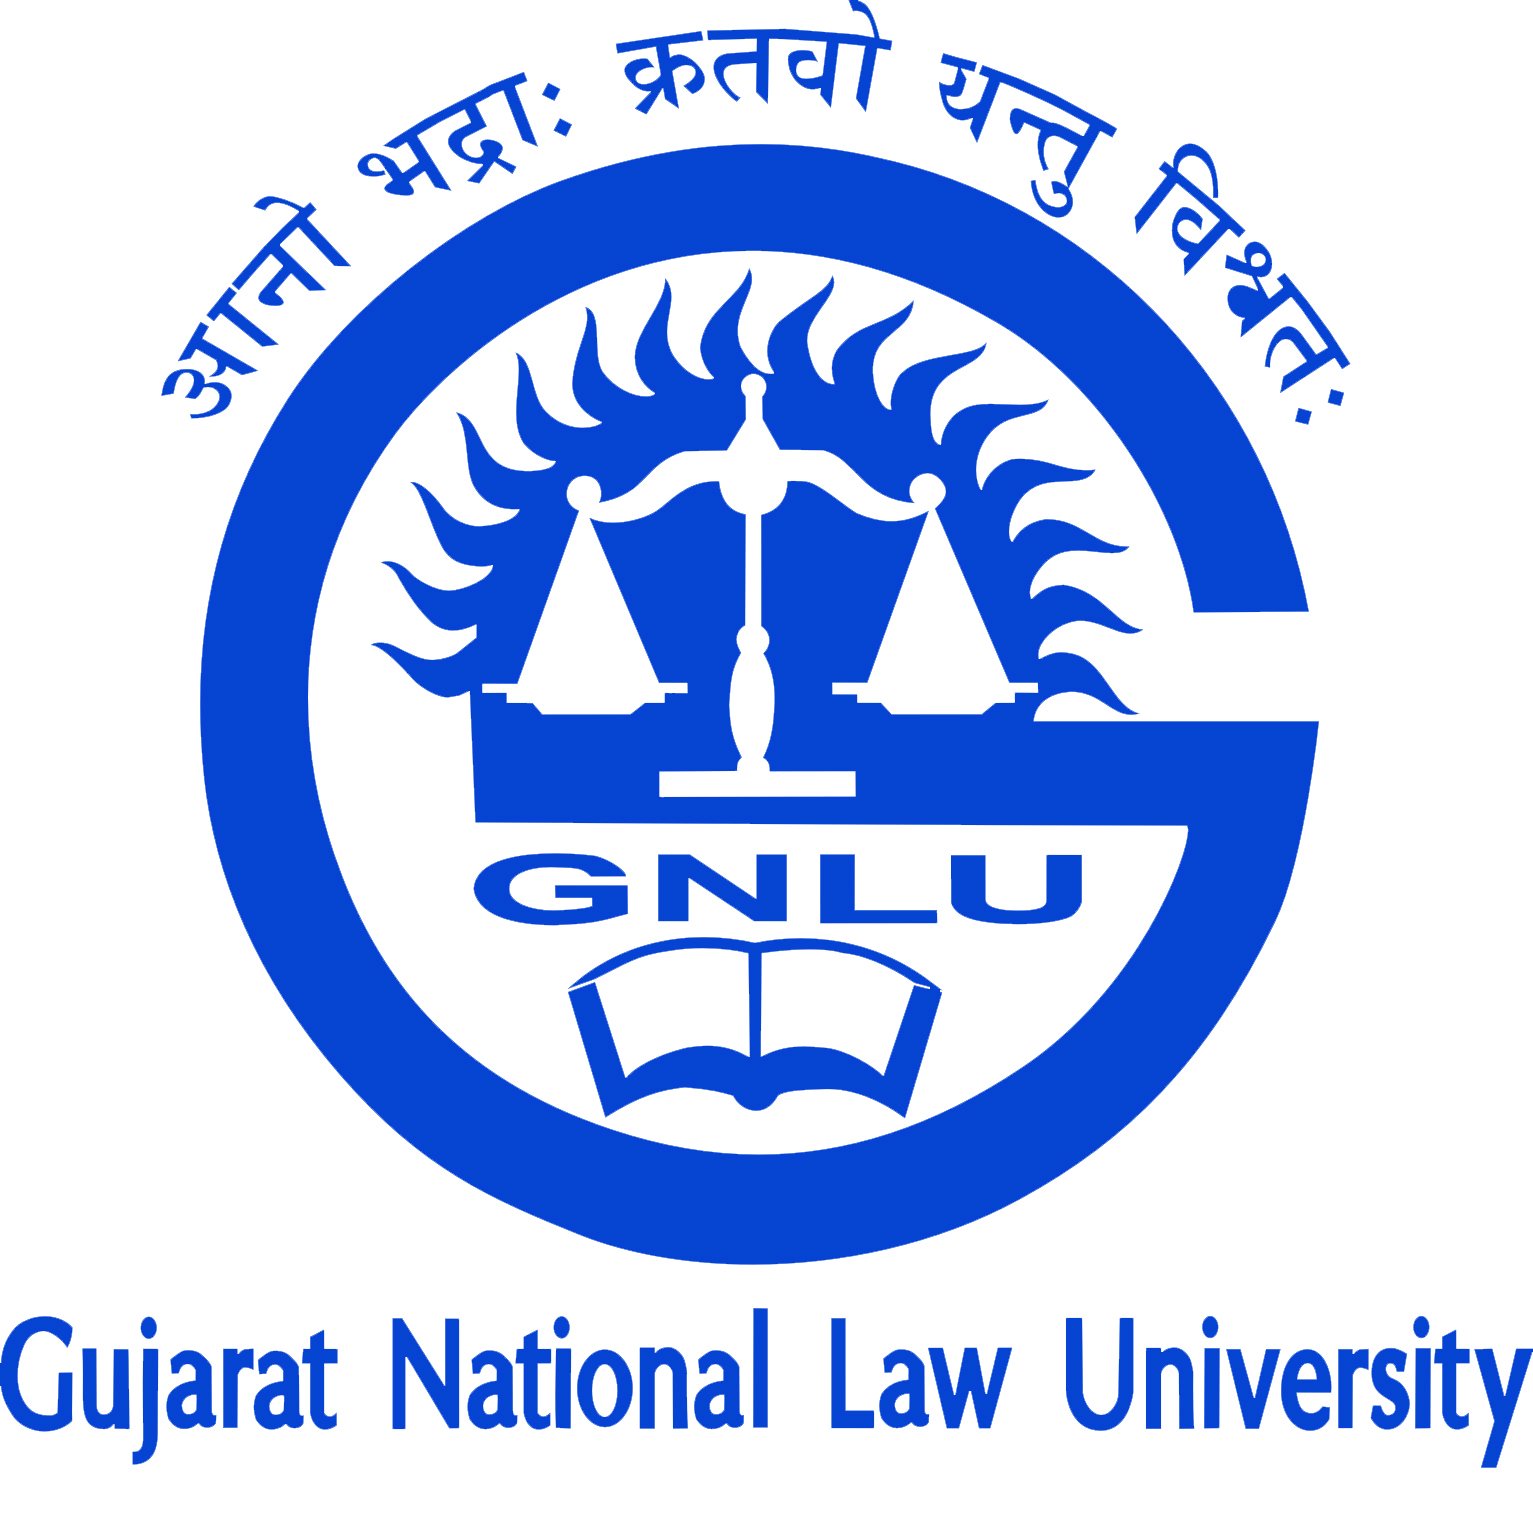 Call for Papers: Edited Book on Handbook of Legal Aspects of Startups in India by GNLU & LegalStartups